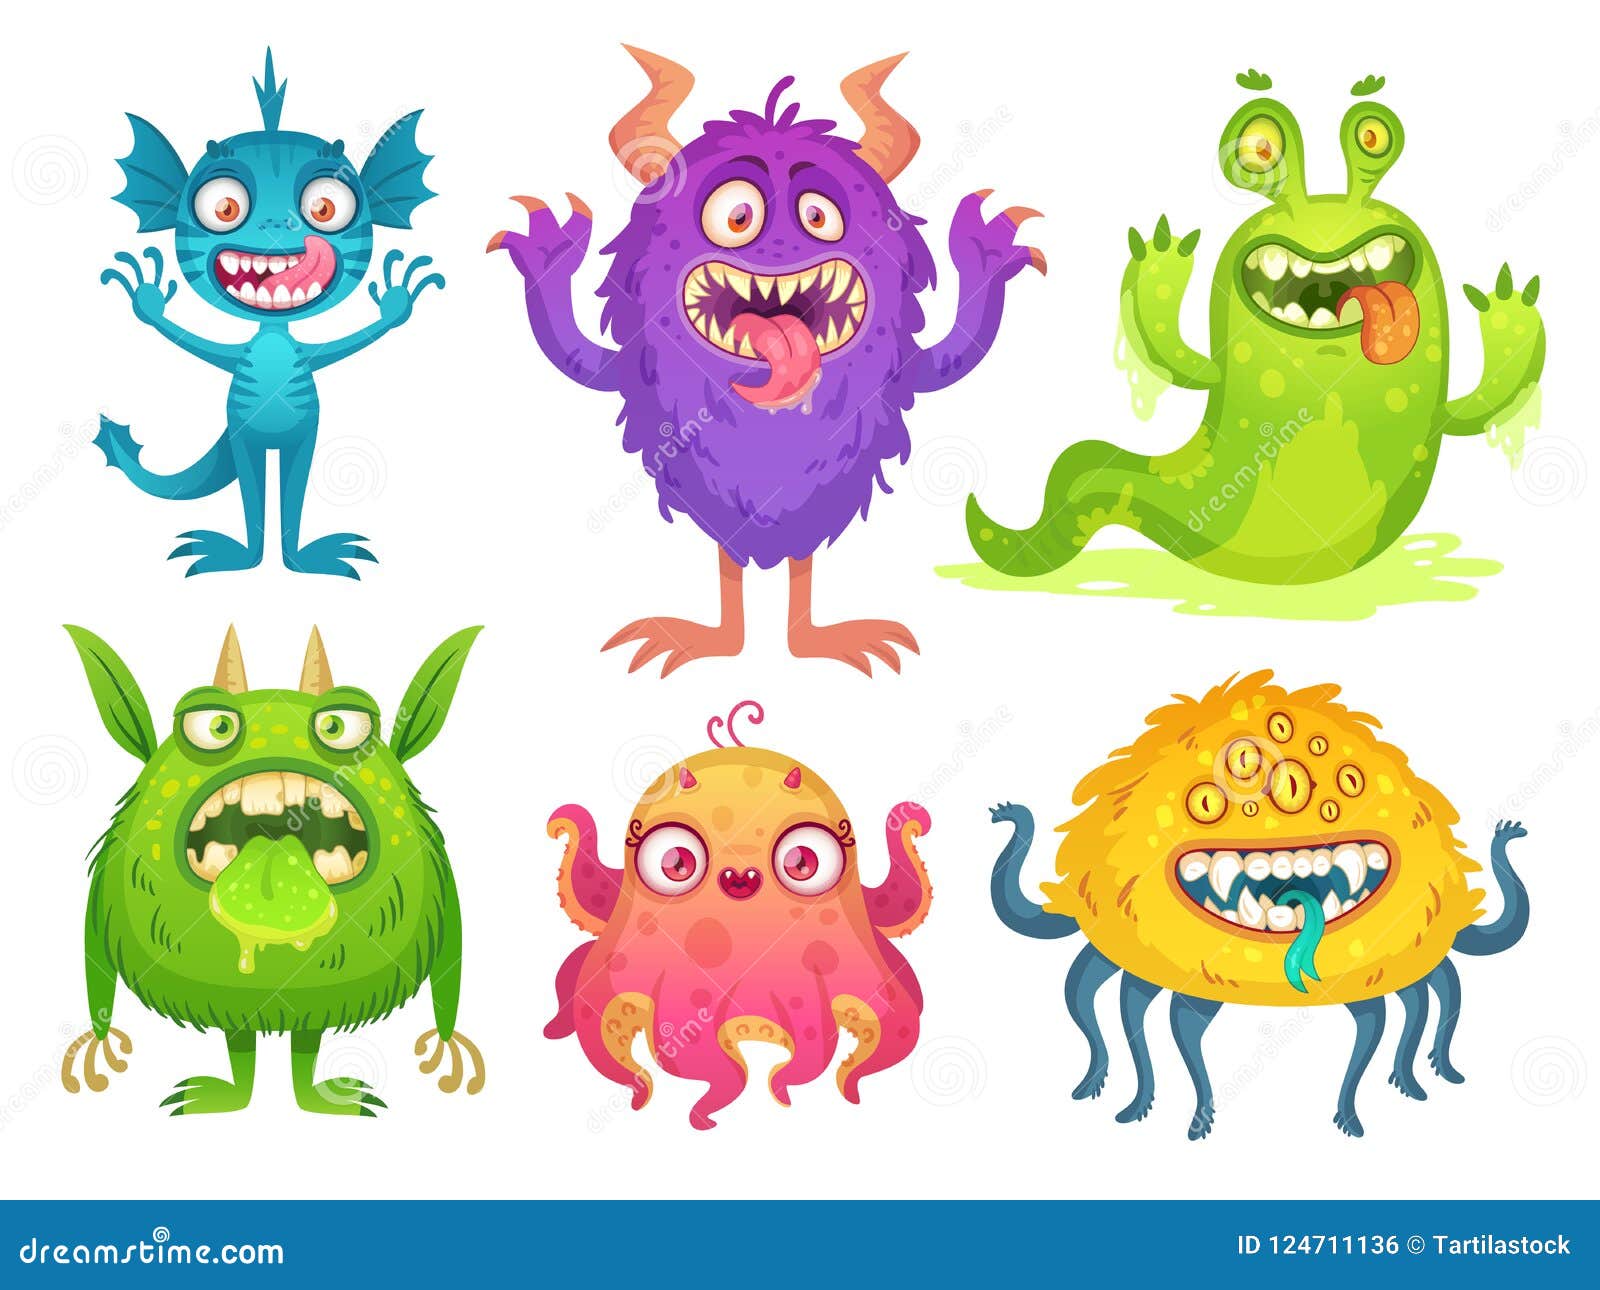 Cartoon Monster Mascot. Halloween Funny Monsters, Bizarre Gremlin with Horn  and Furry Creations. Cartoons Character Stock Vector - Illustration of  comic, creature: 124711136